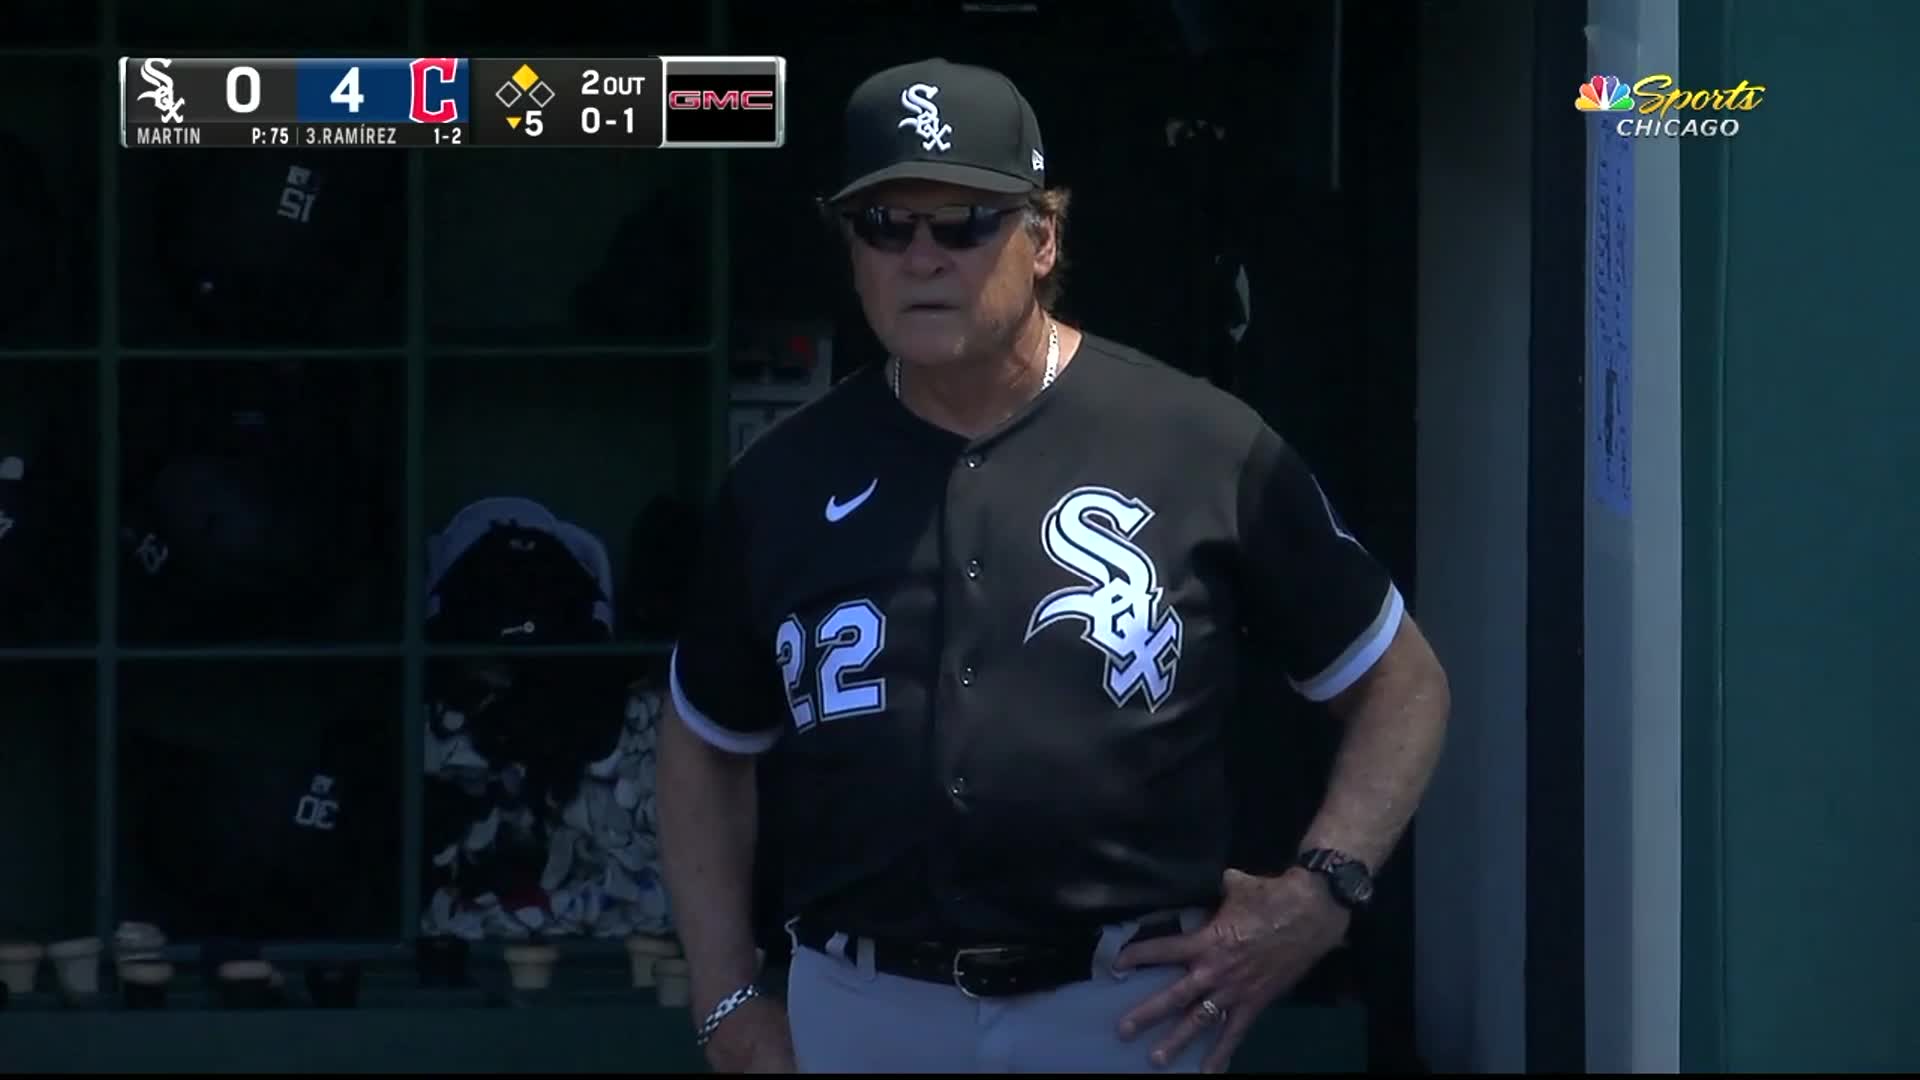 Highlight] Tony La Russa and the White Sox intentionally walk Jose Ramirez  on an 0-1 count after fouling off the first pitch. : r/baseball